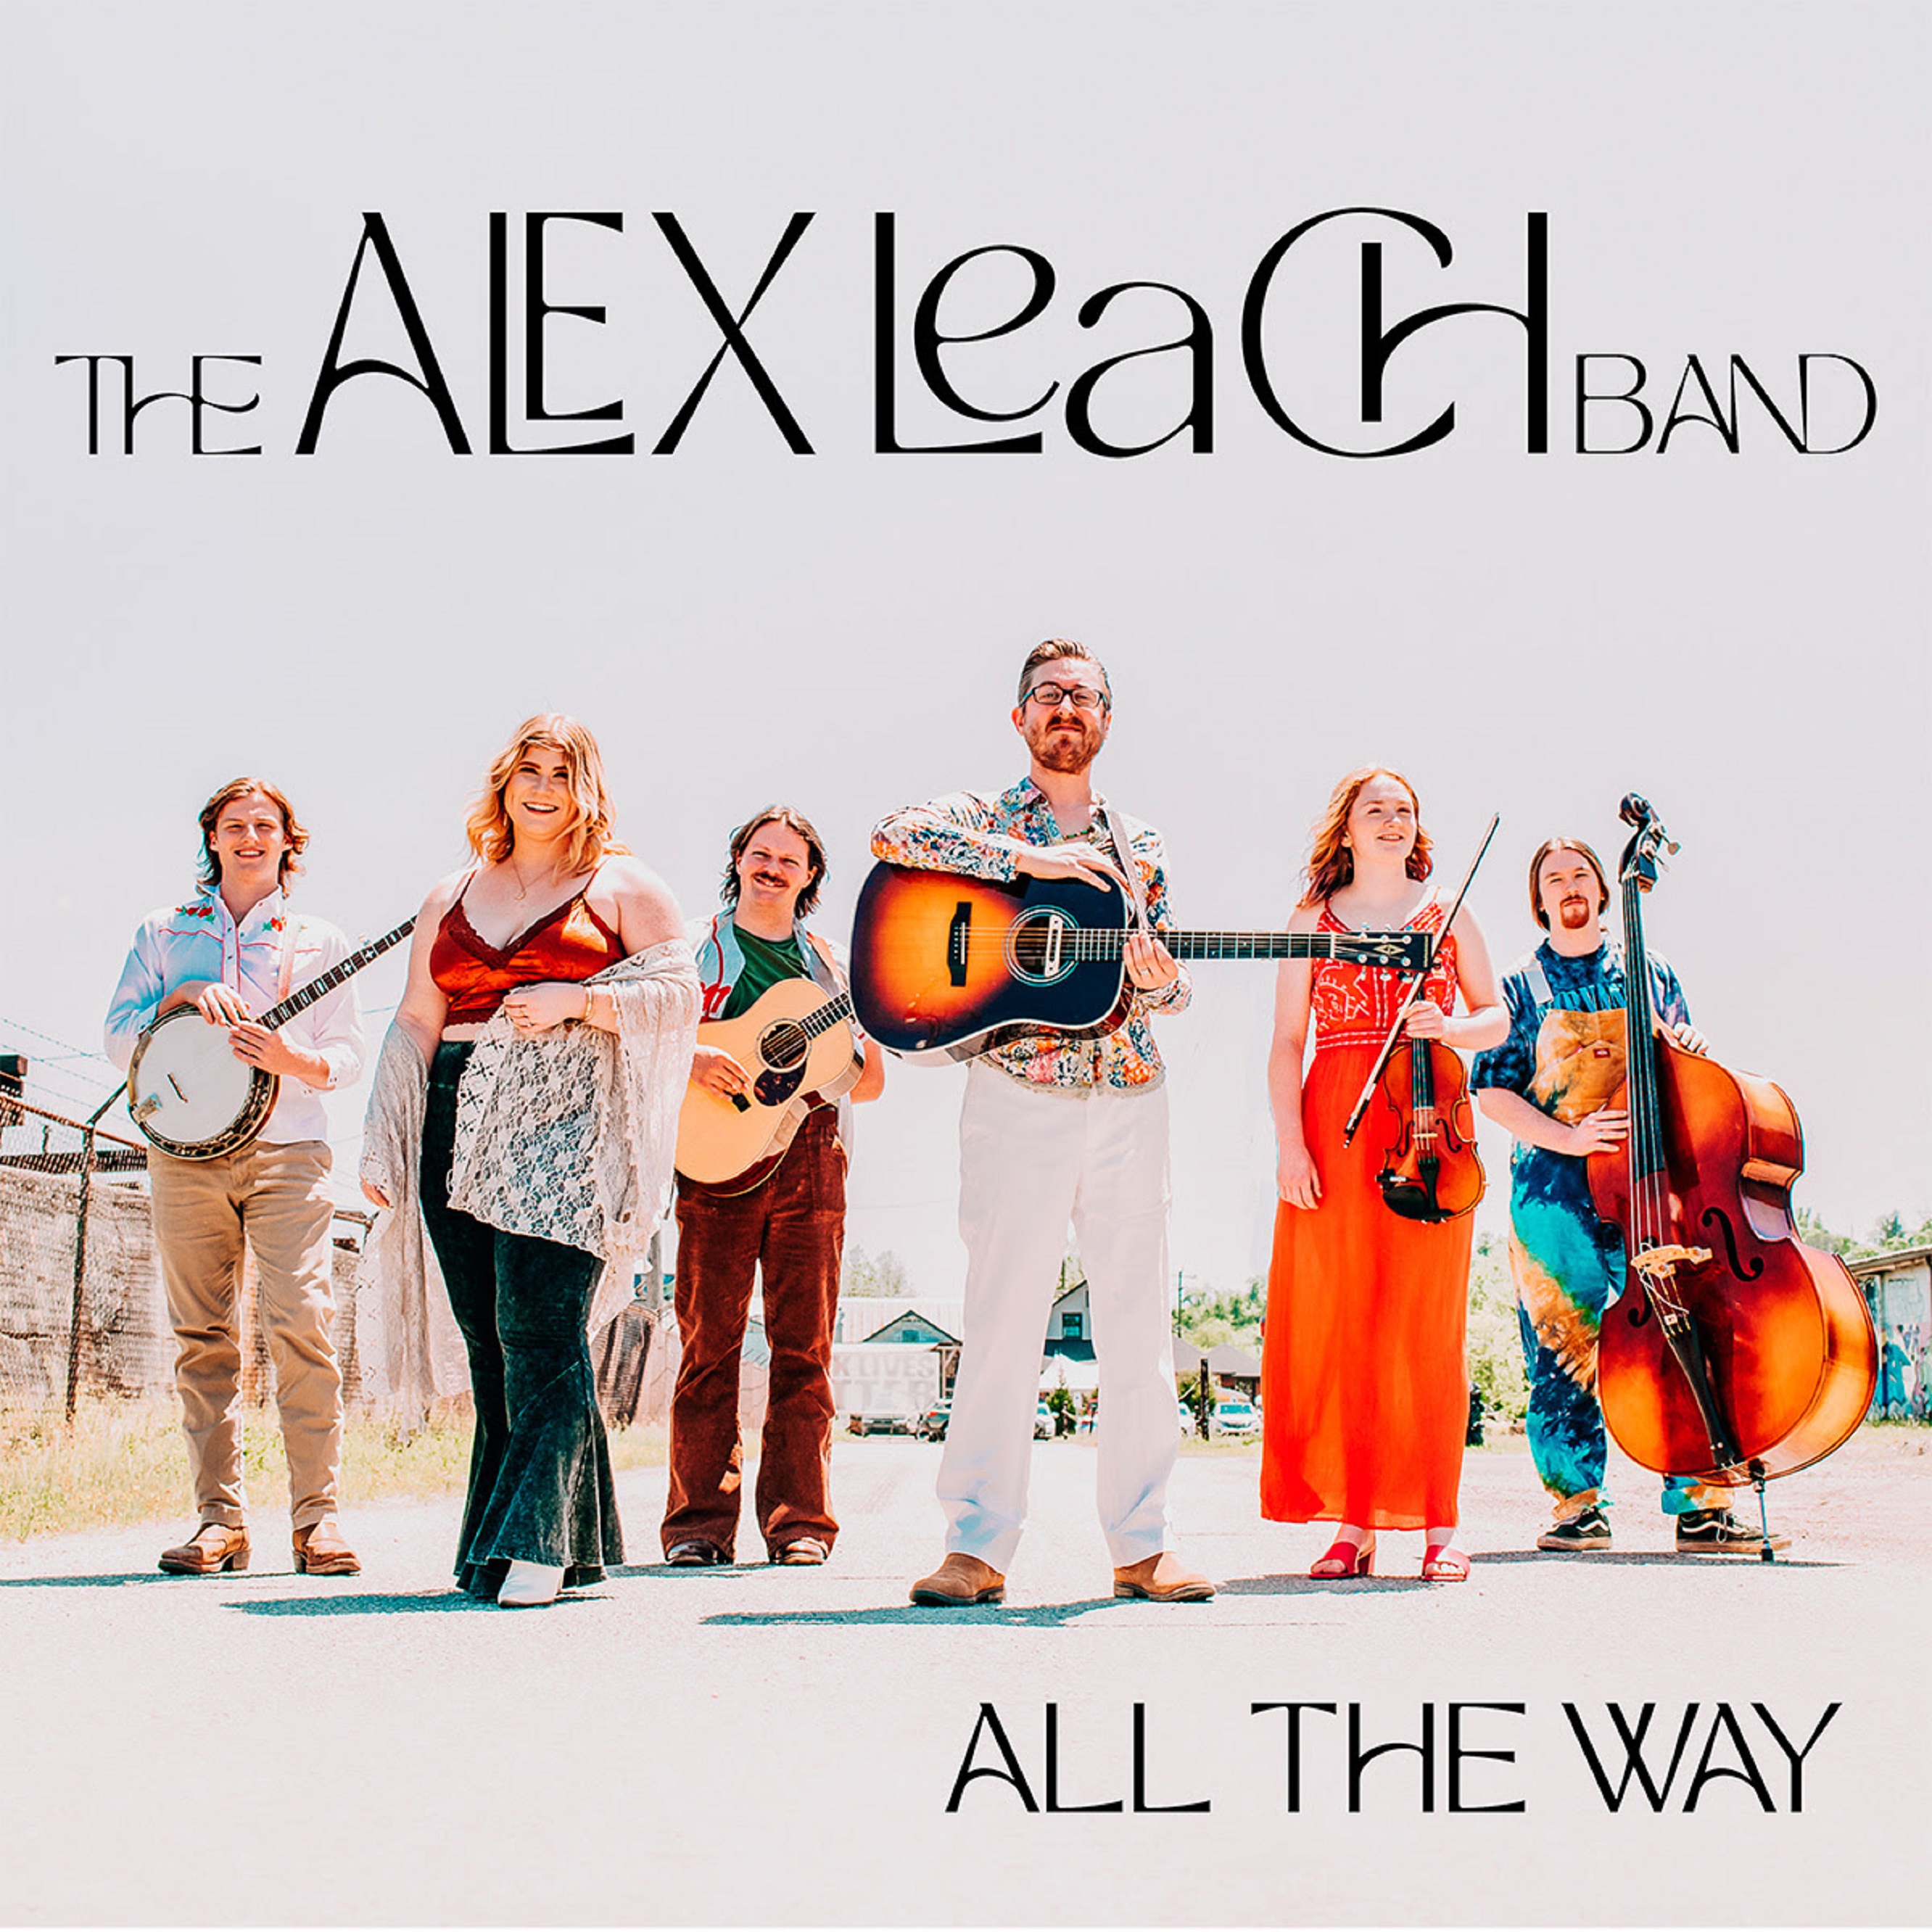 The Alex Leach Band dives deeper into fresh sounds with All The Way